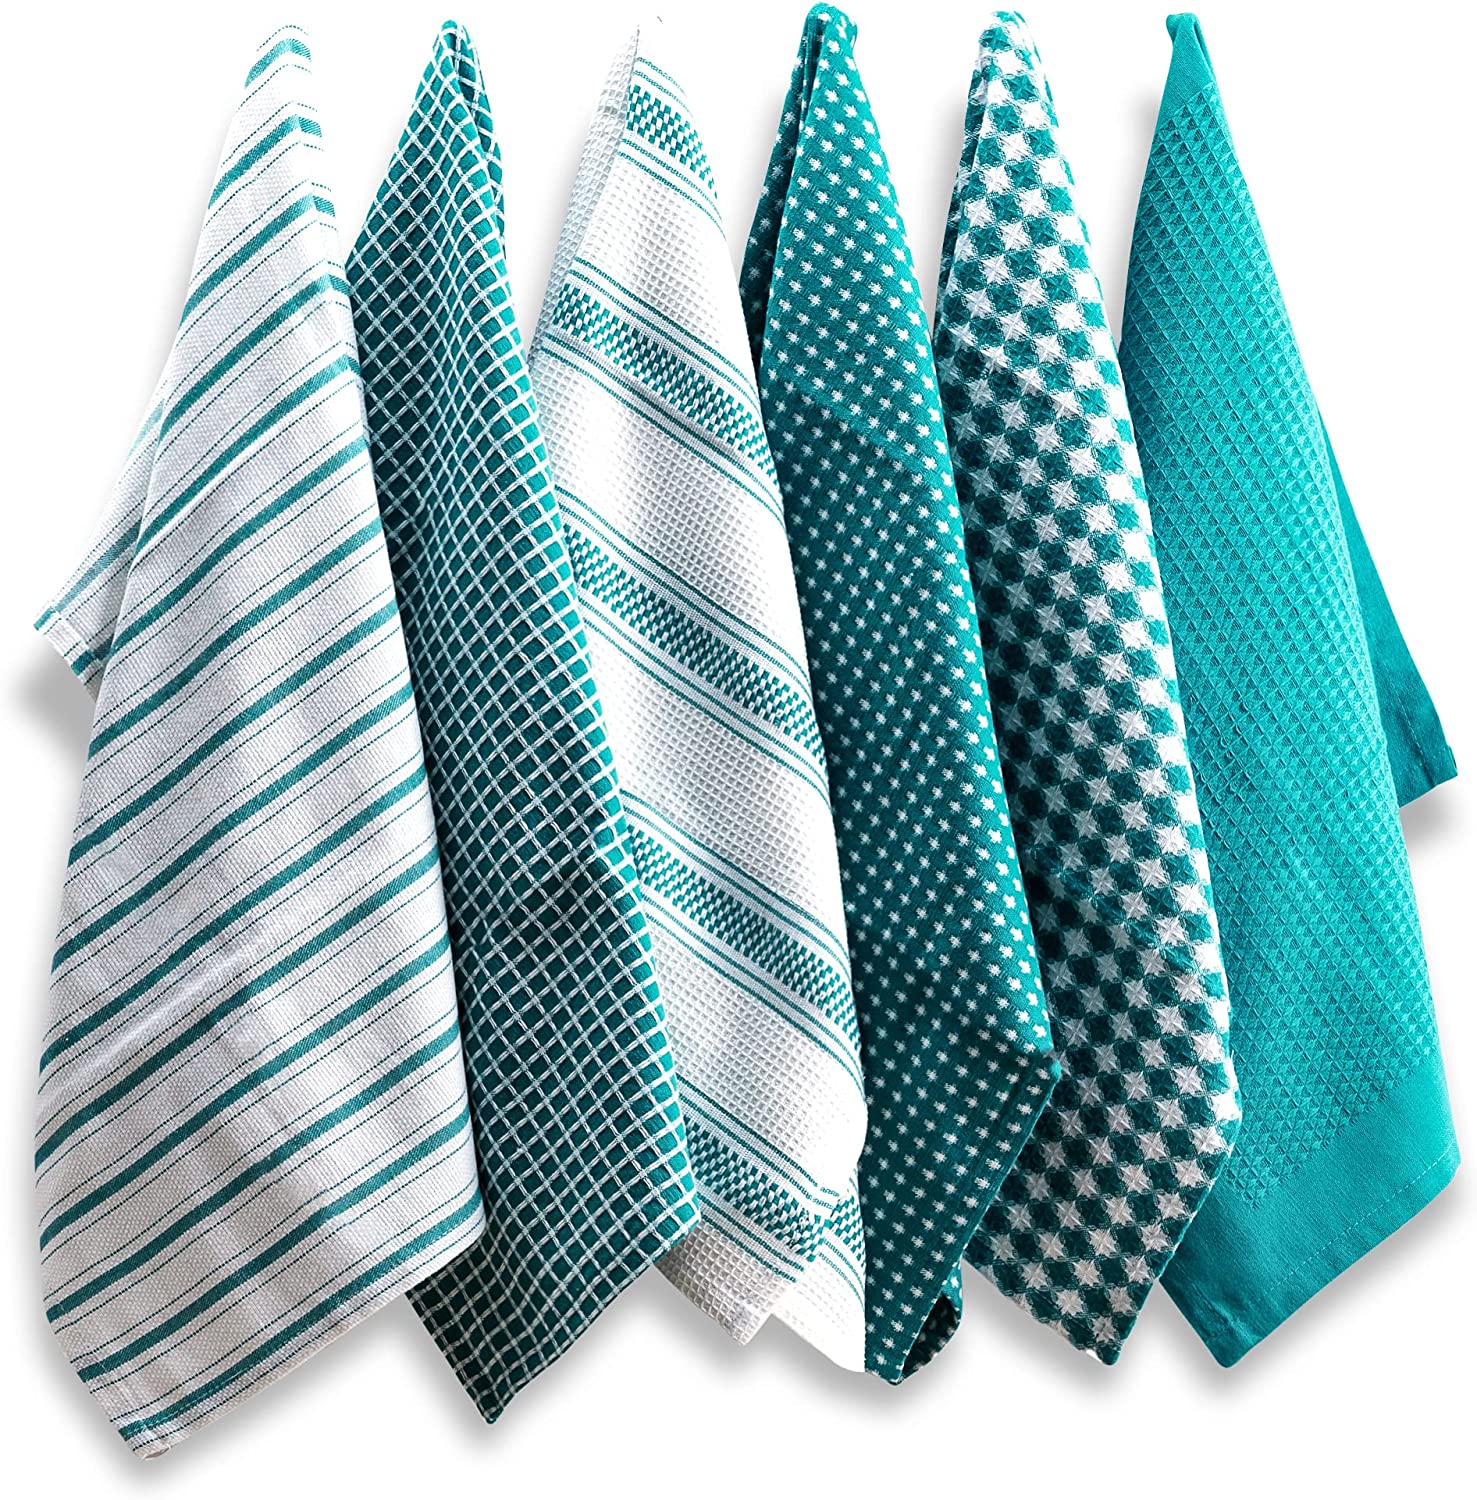 white and teal striped dish towels, teal kitchen towels, teal stripe kitchen towels for wedding.